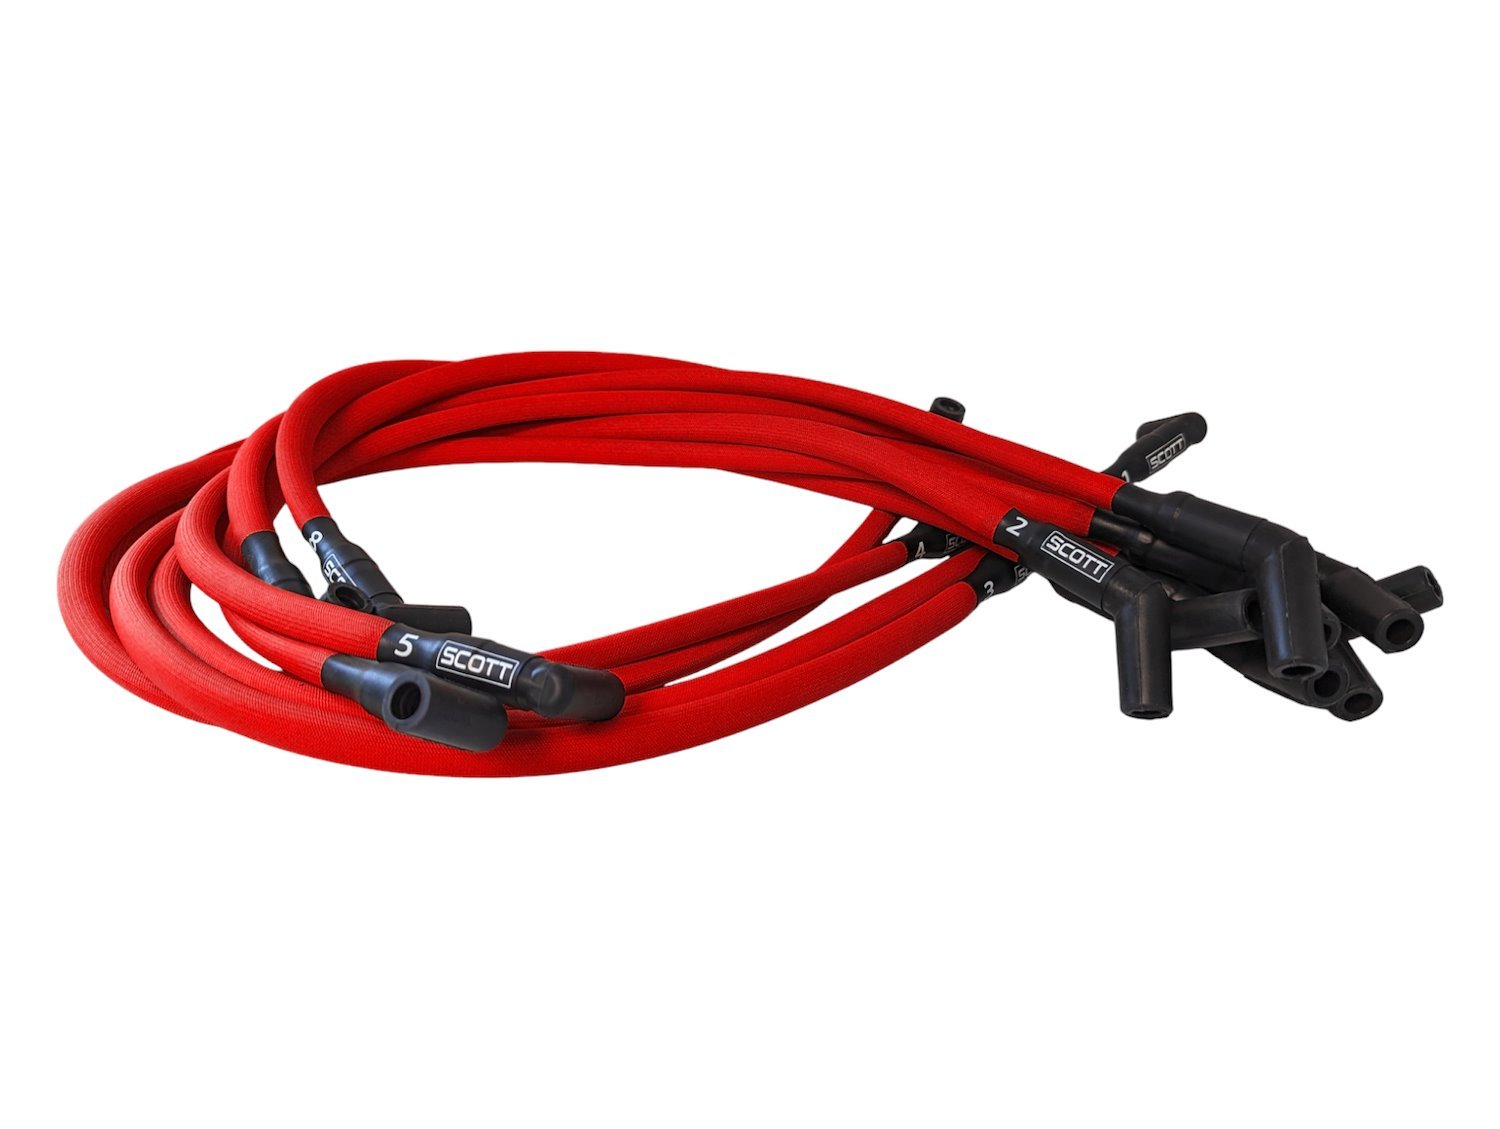 SPW300-PS-415-2 Super Mag Fiberglass-Oversleeved Spark Plug Wire Set for Big Block Chevy, Over Valve Cover [Red]